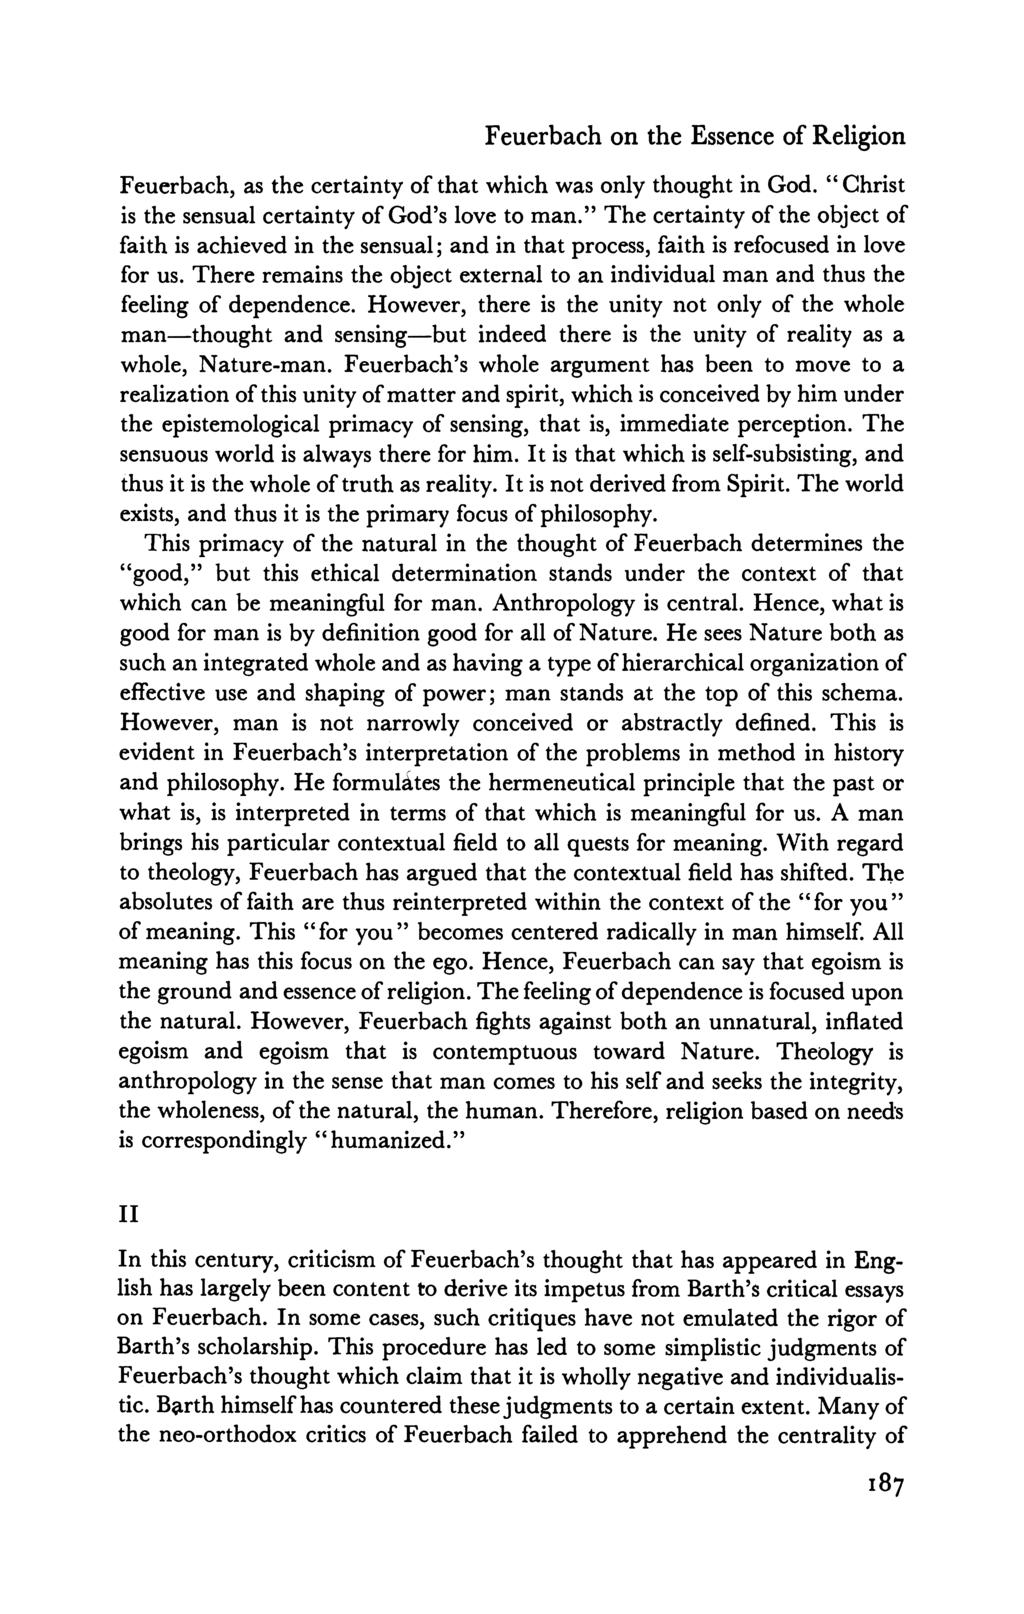 Feuerbach on the Essence of Religion Feuerbach, as the certainty of that which was only thought in God. " Christ is the sensual certainty of God's love to man.